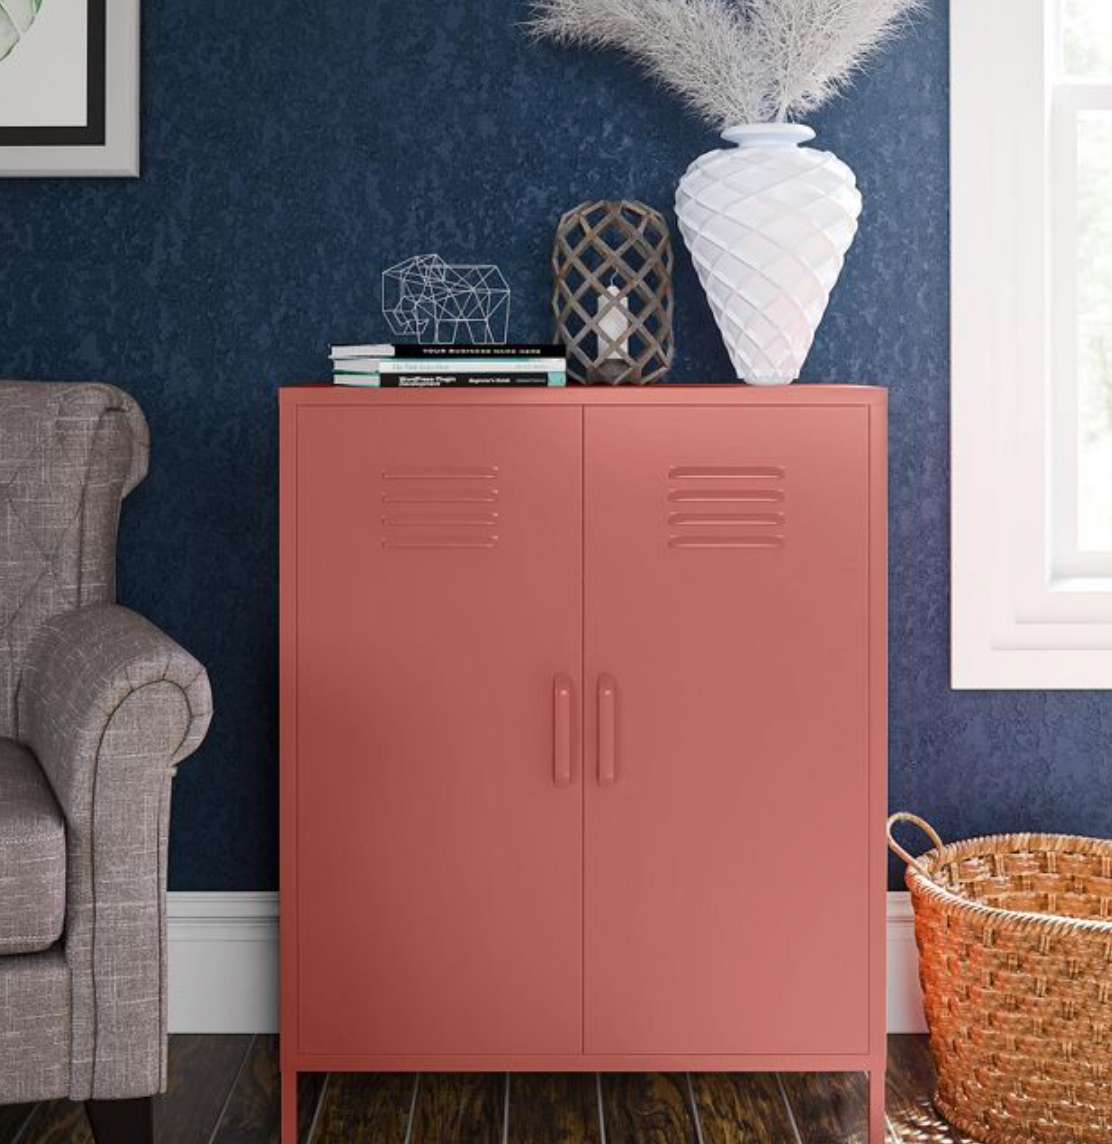 Red metal locker accent cabinet with books and decorations on top